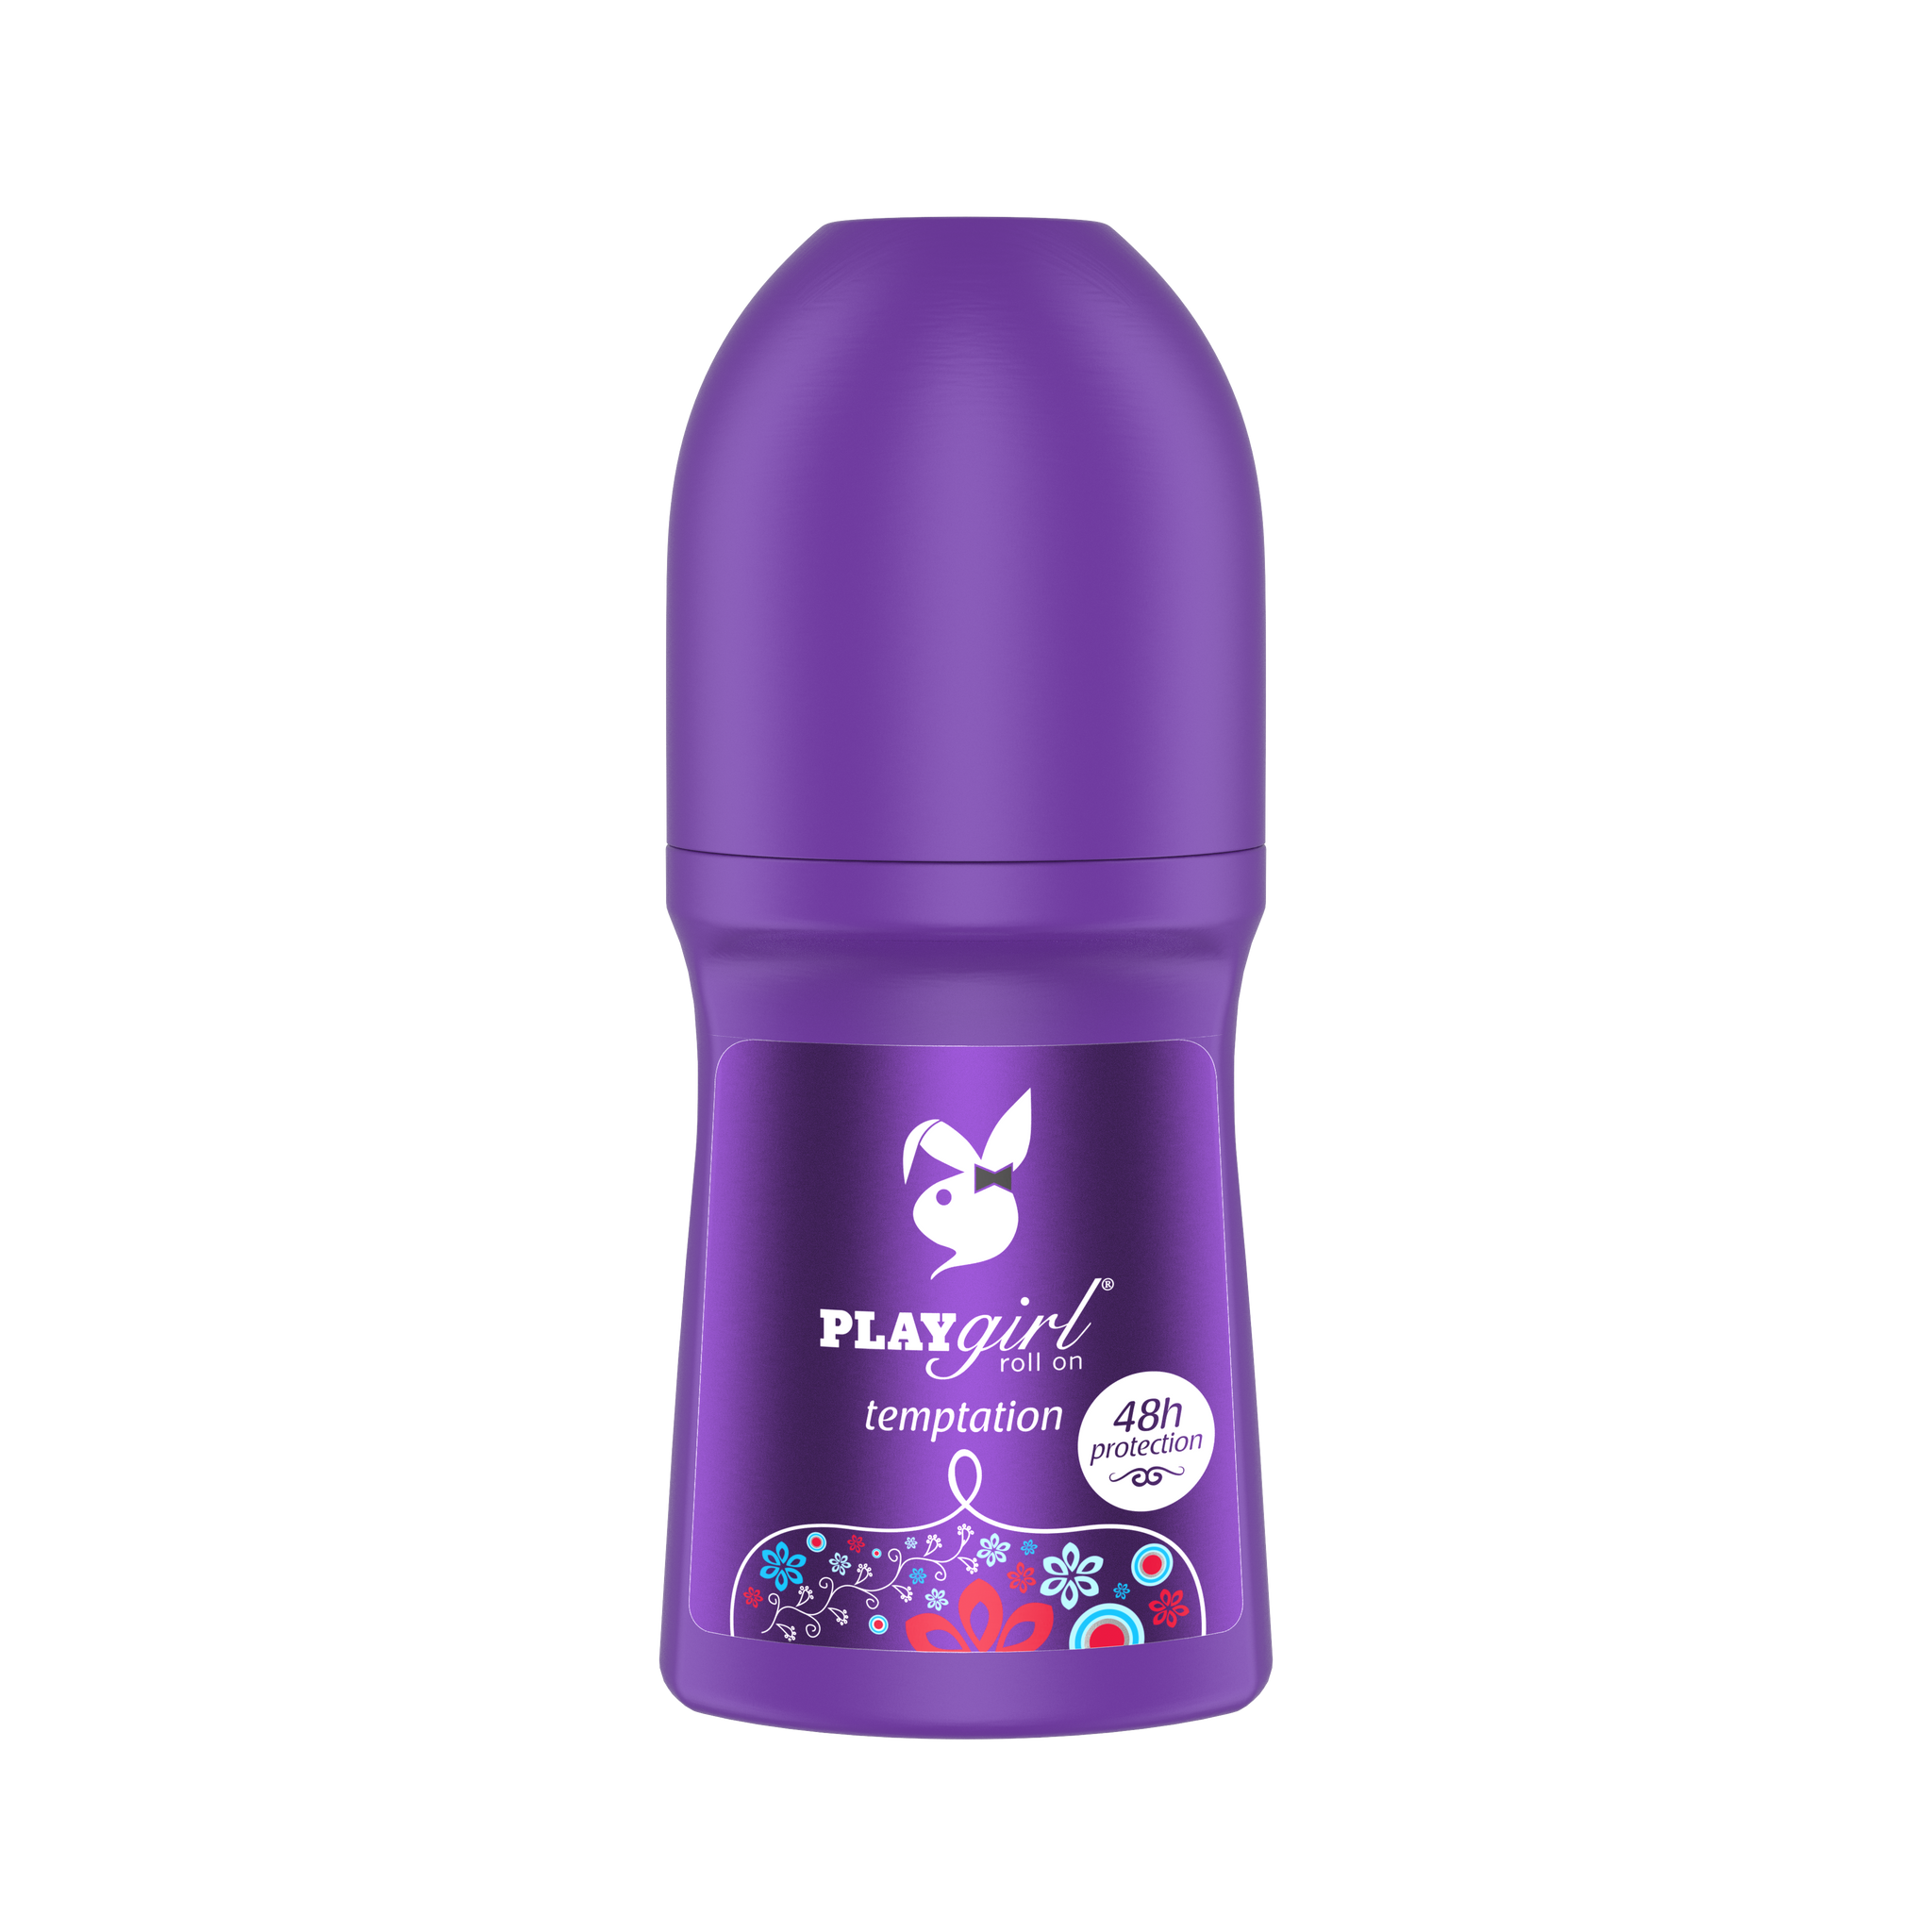 Playgirl Temptation -Roll on - 50ml 36-Pack